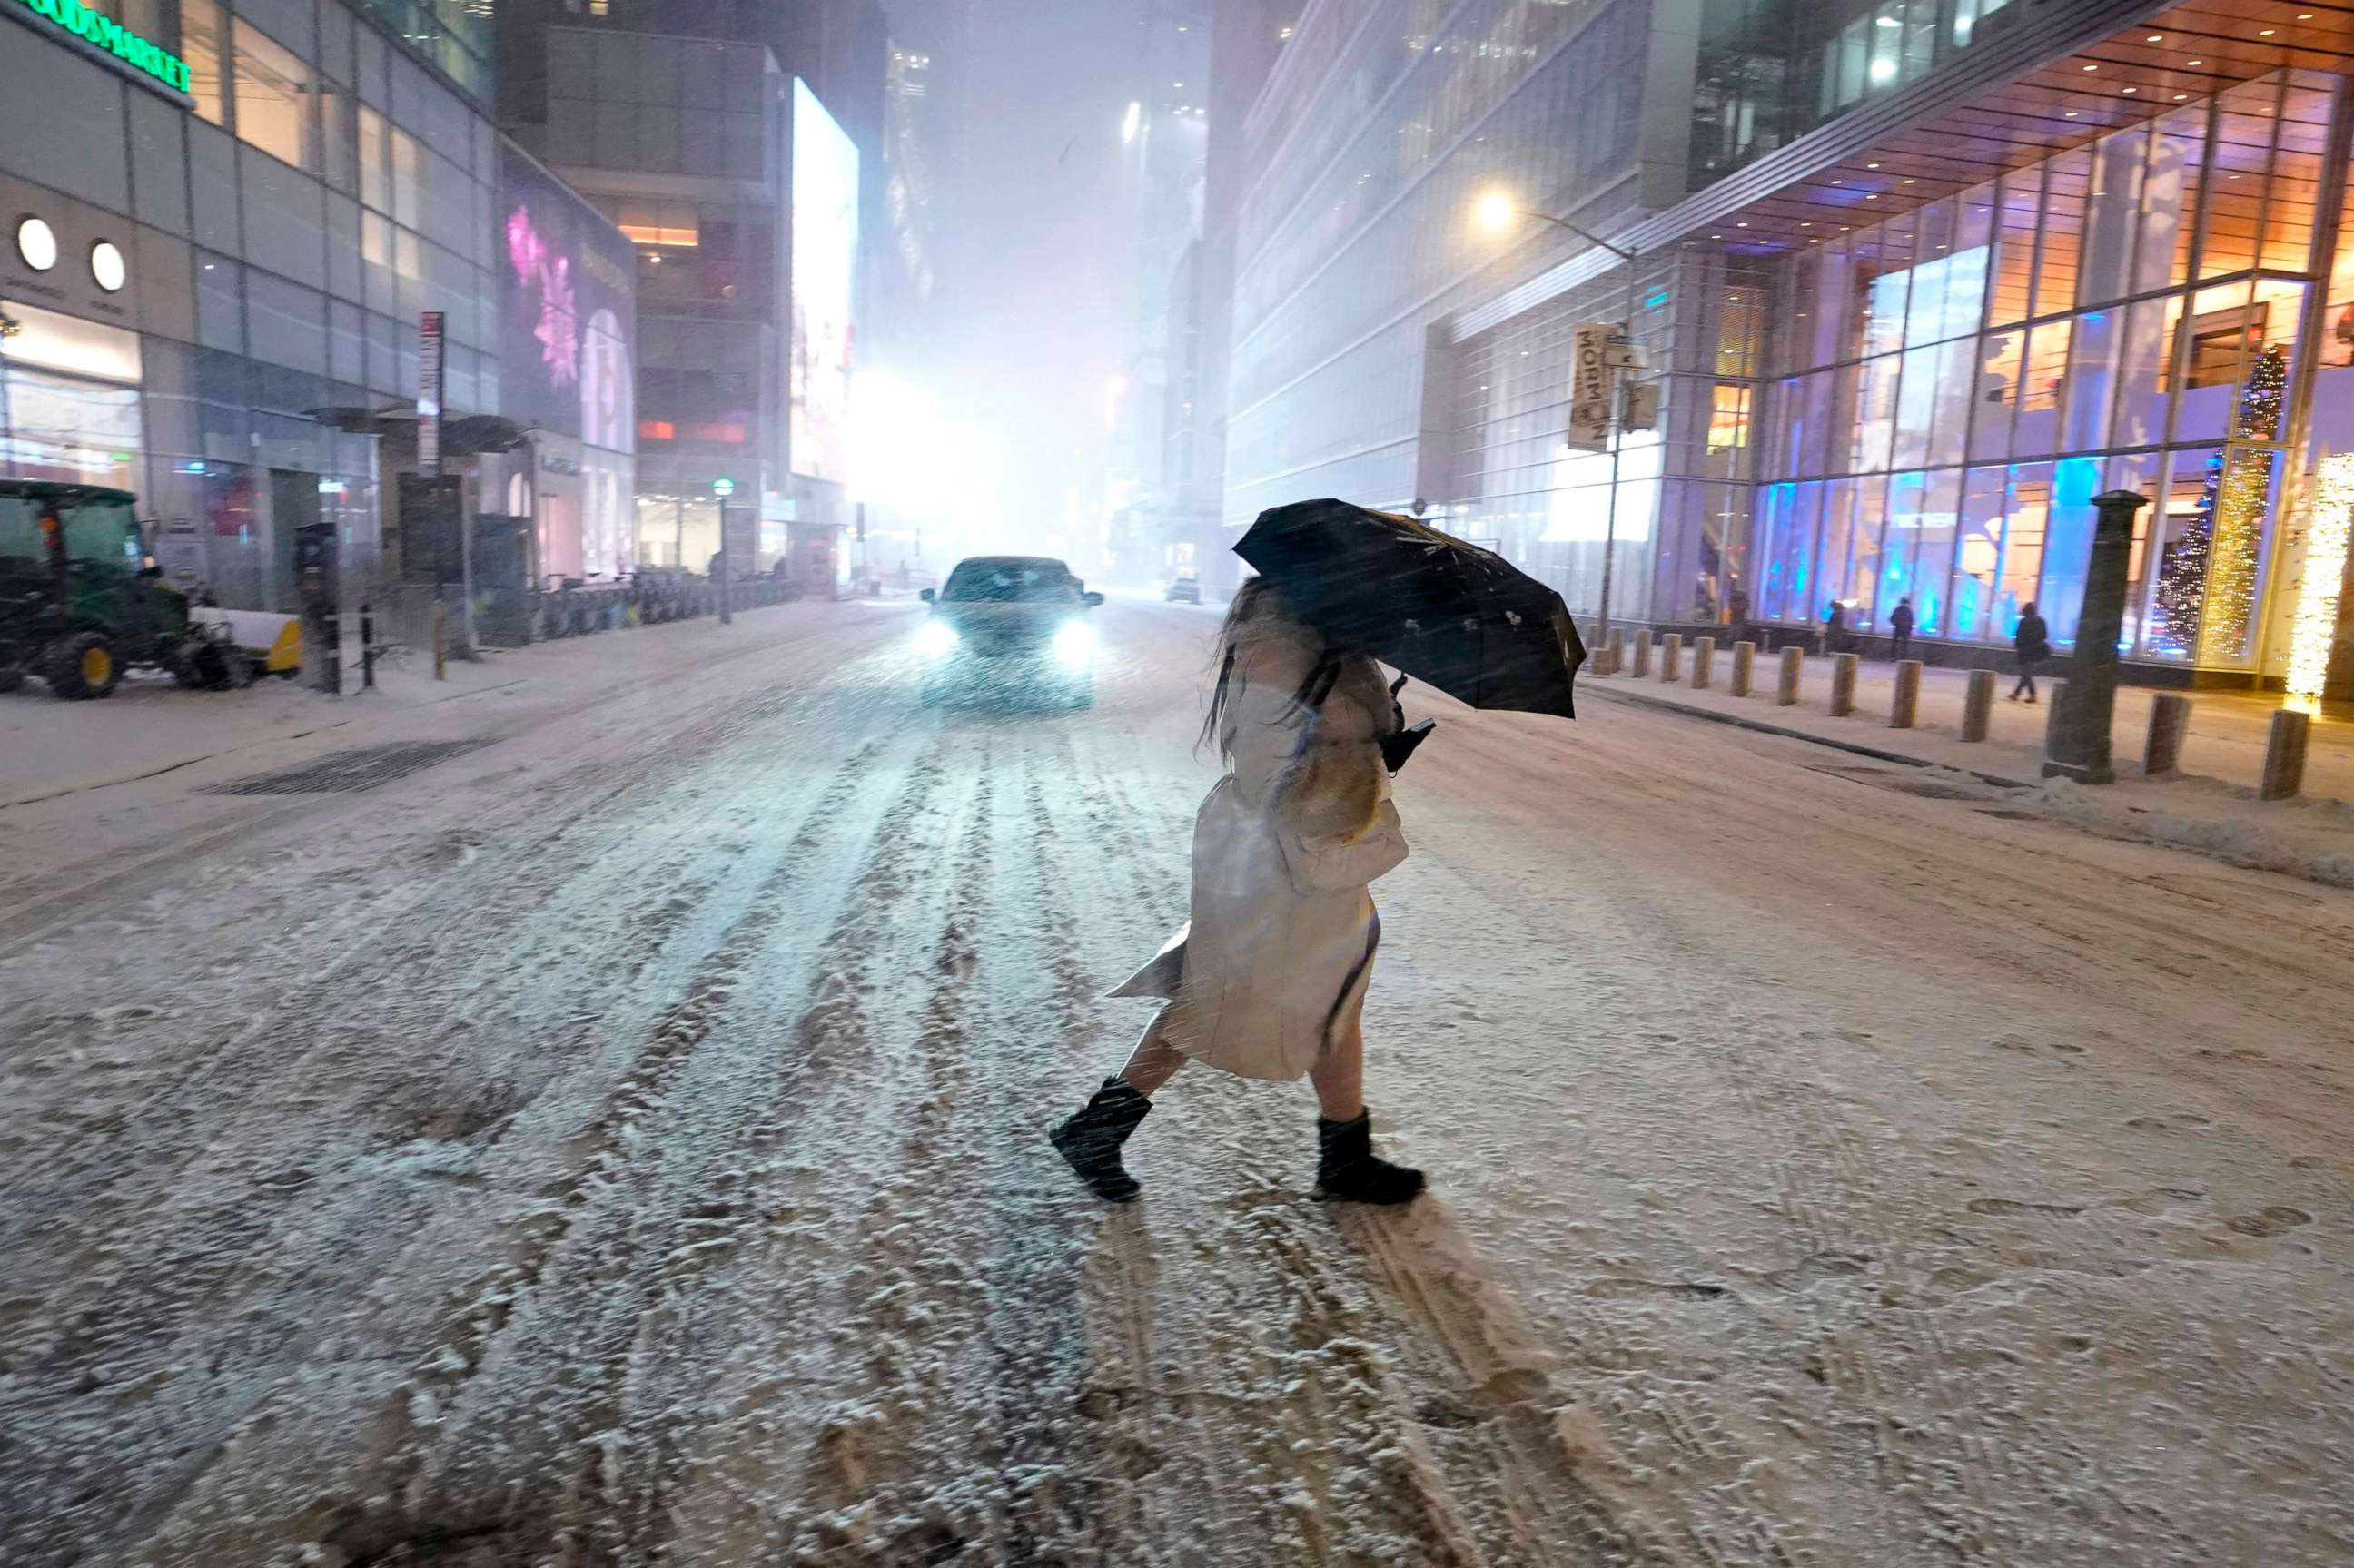 PHOTO: TOPSHOT - A person holds an umbrella as she walks under the snow in Times Square in New York City, Dec. 16, 2020.